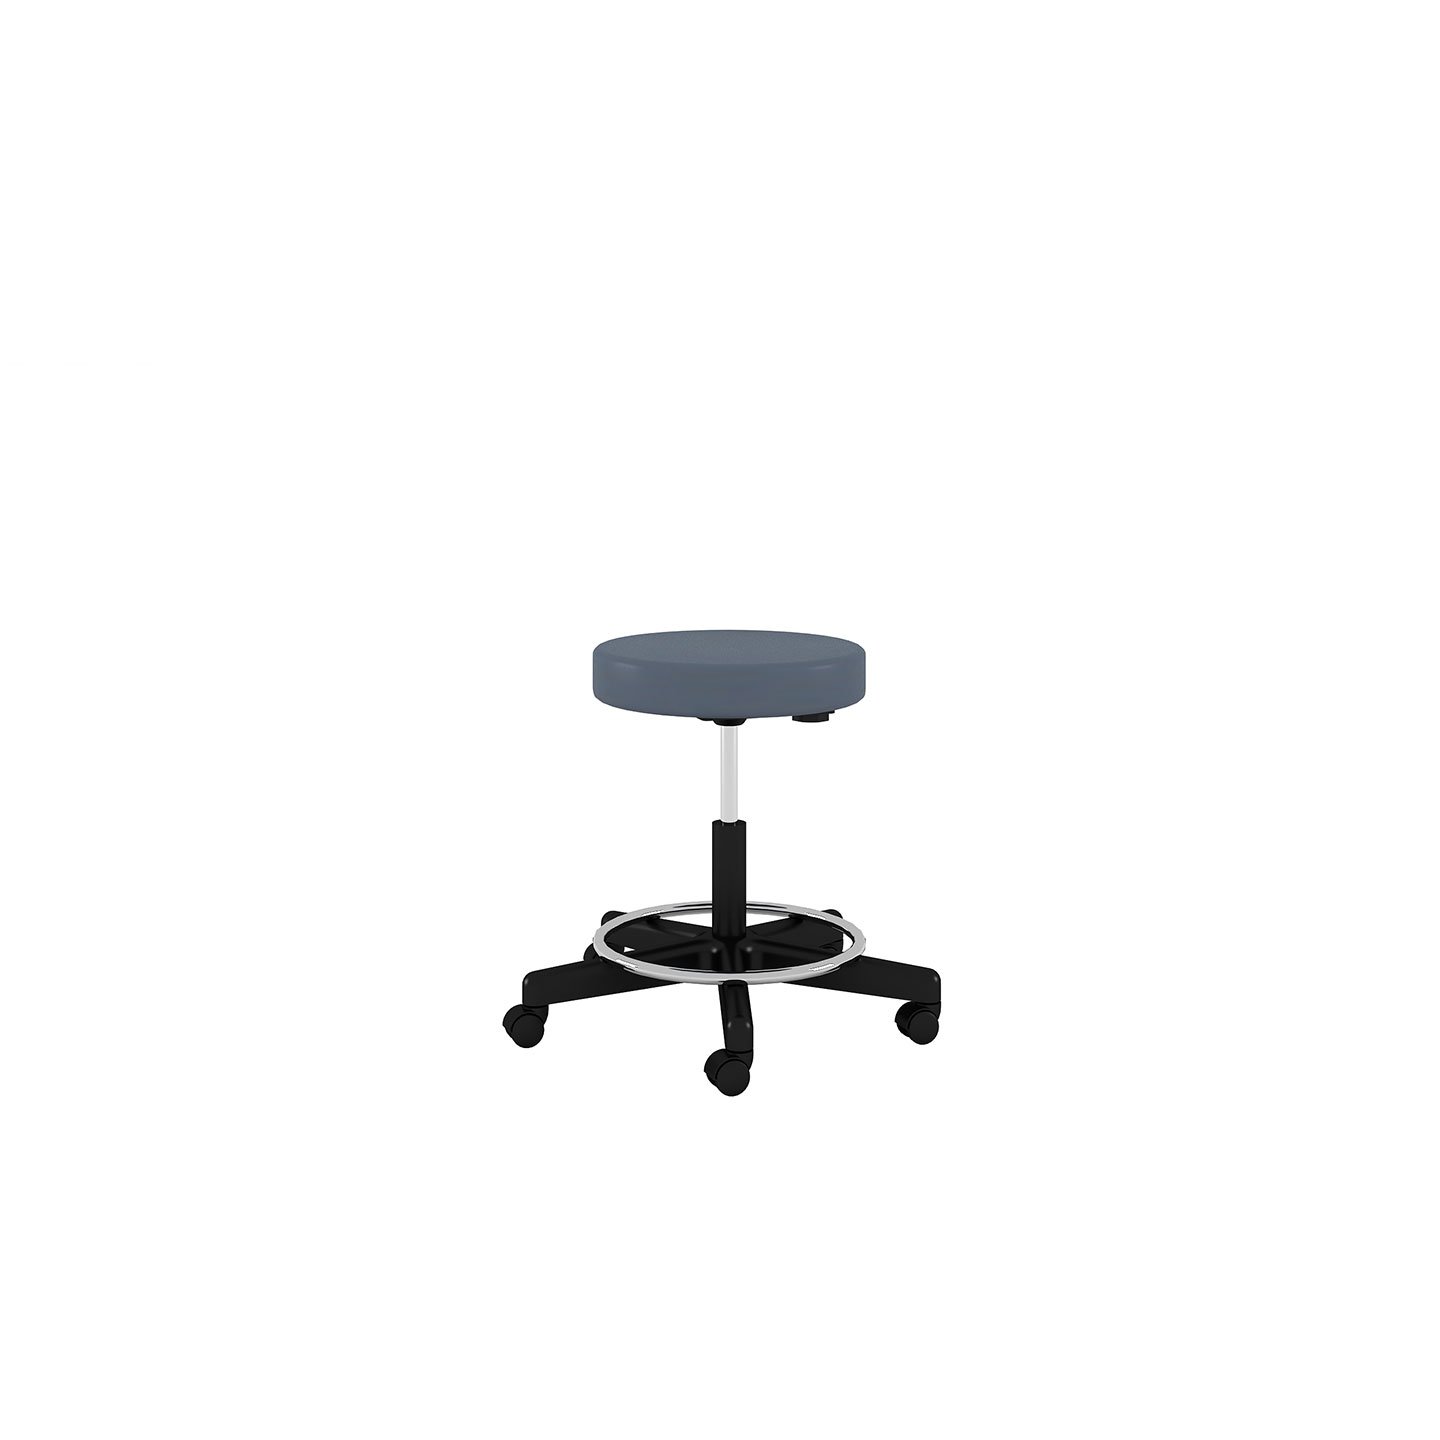 Haworth Exam stool in a greyish blue seating with a swivel base and wheels